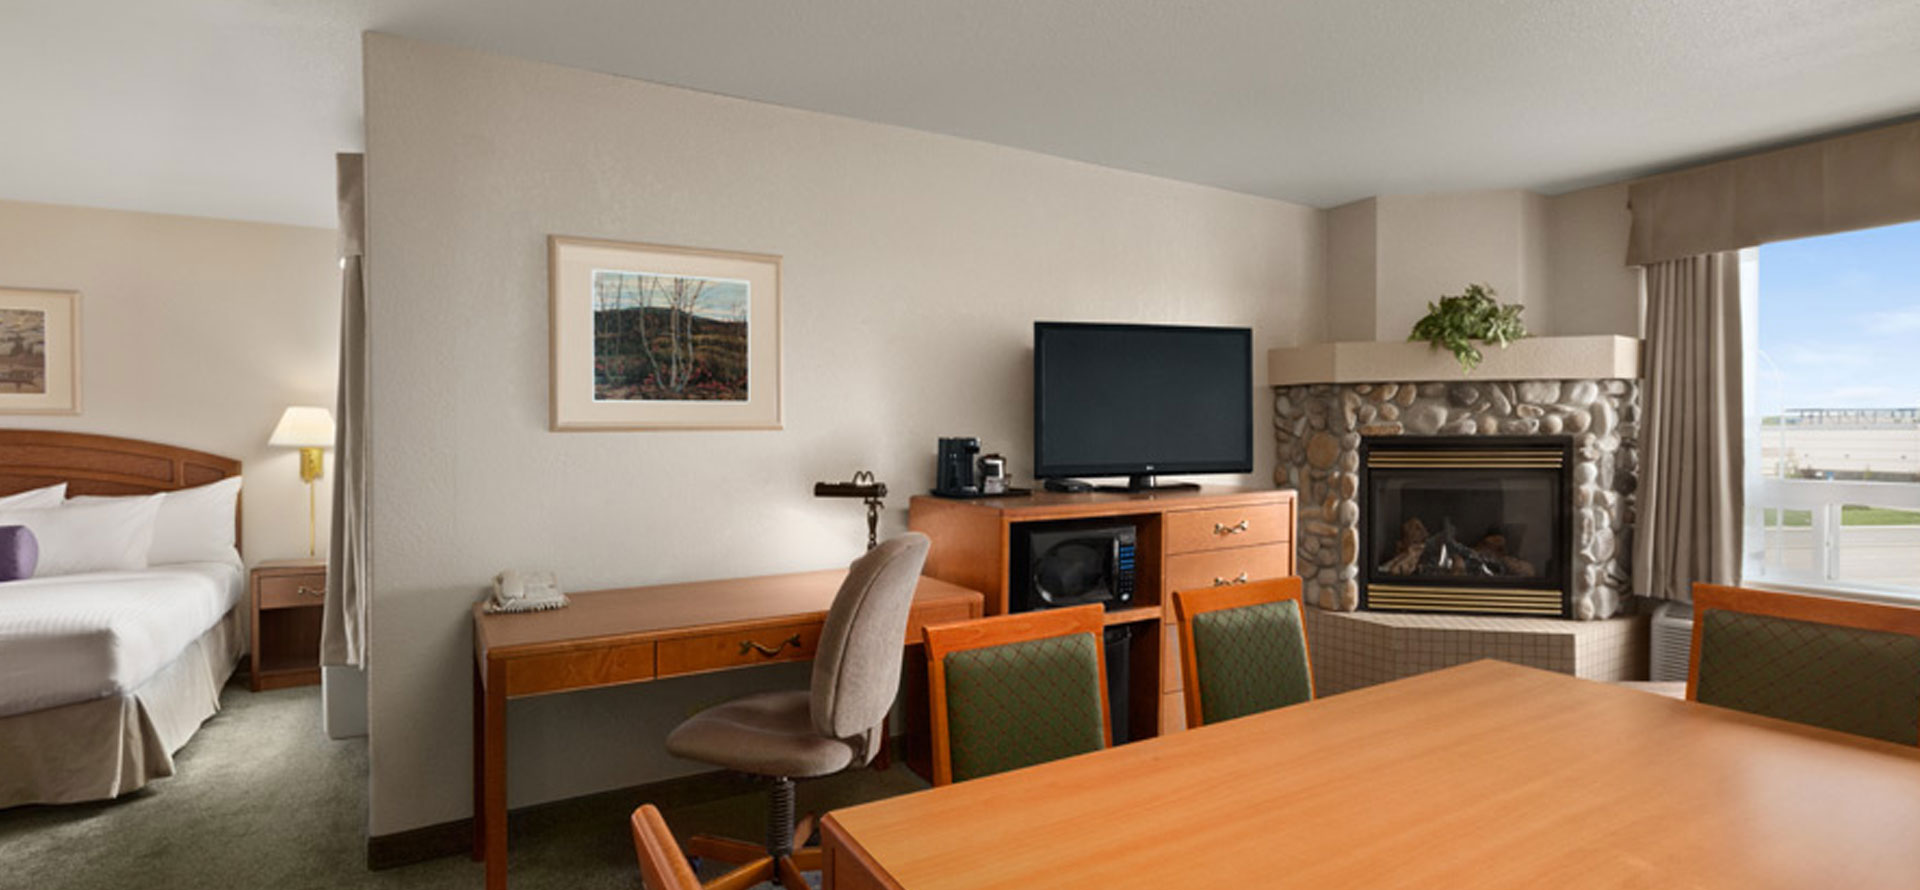 Business class suite with king sized bed, work desk, ergonomic chair, eating table and dining chairs at Days Inn Red Deer, Alberta.
               